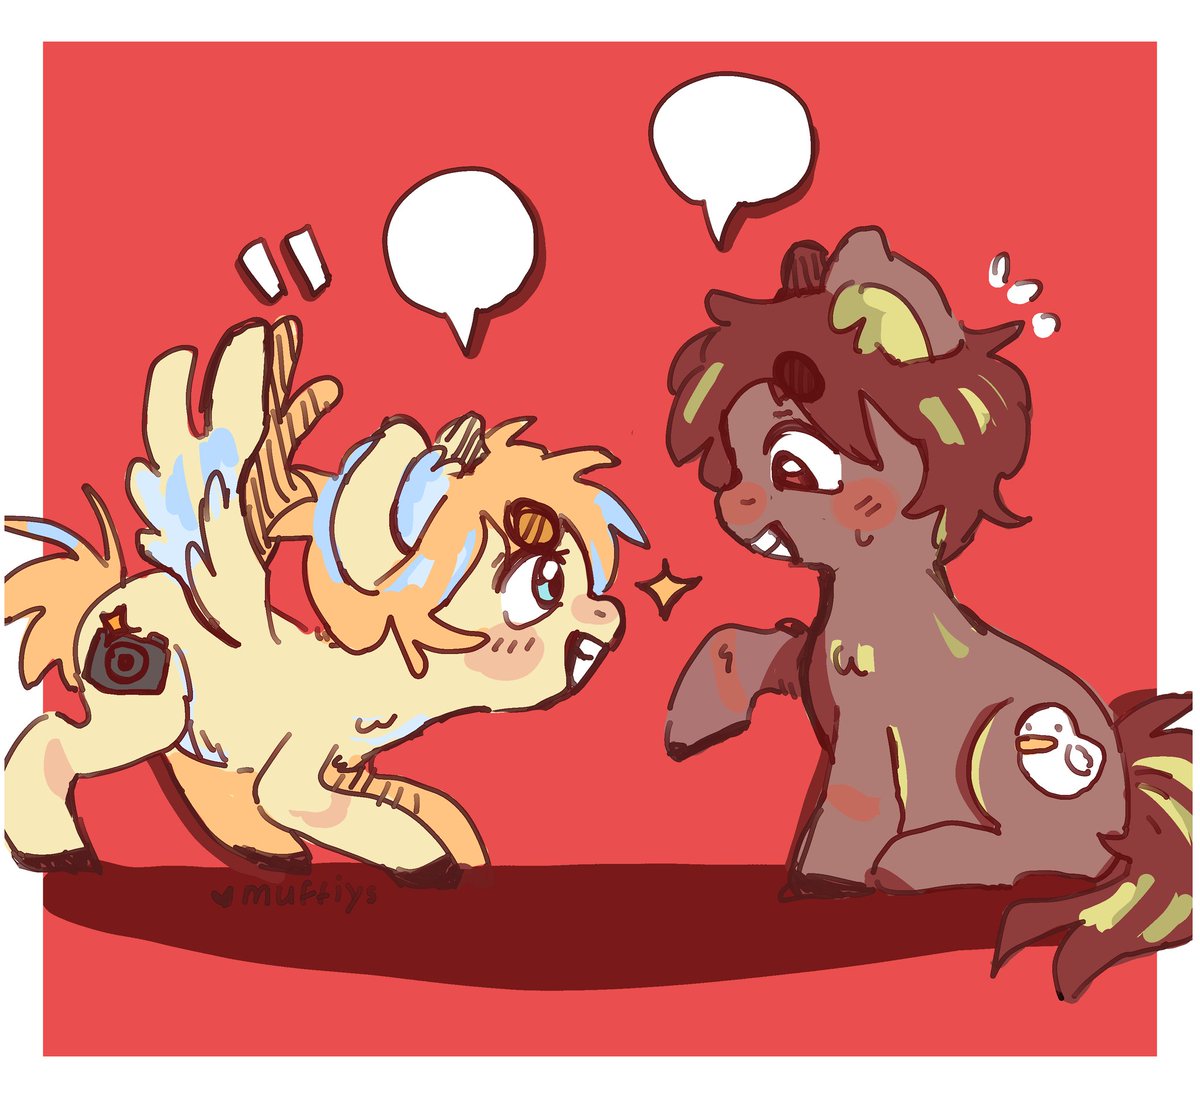 they're just silly ponies!

#clingyduofanart rts appreciated<3